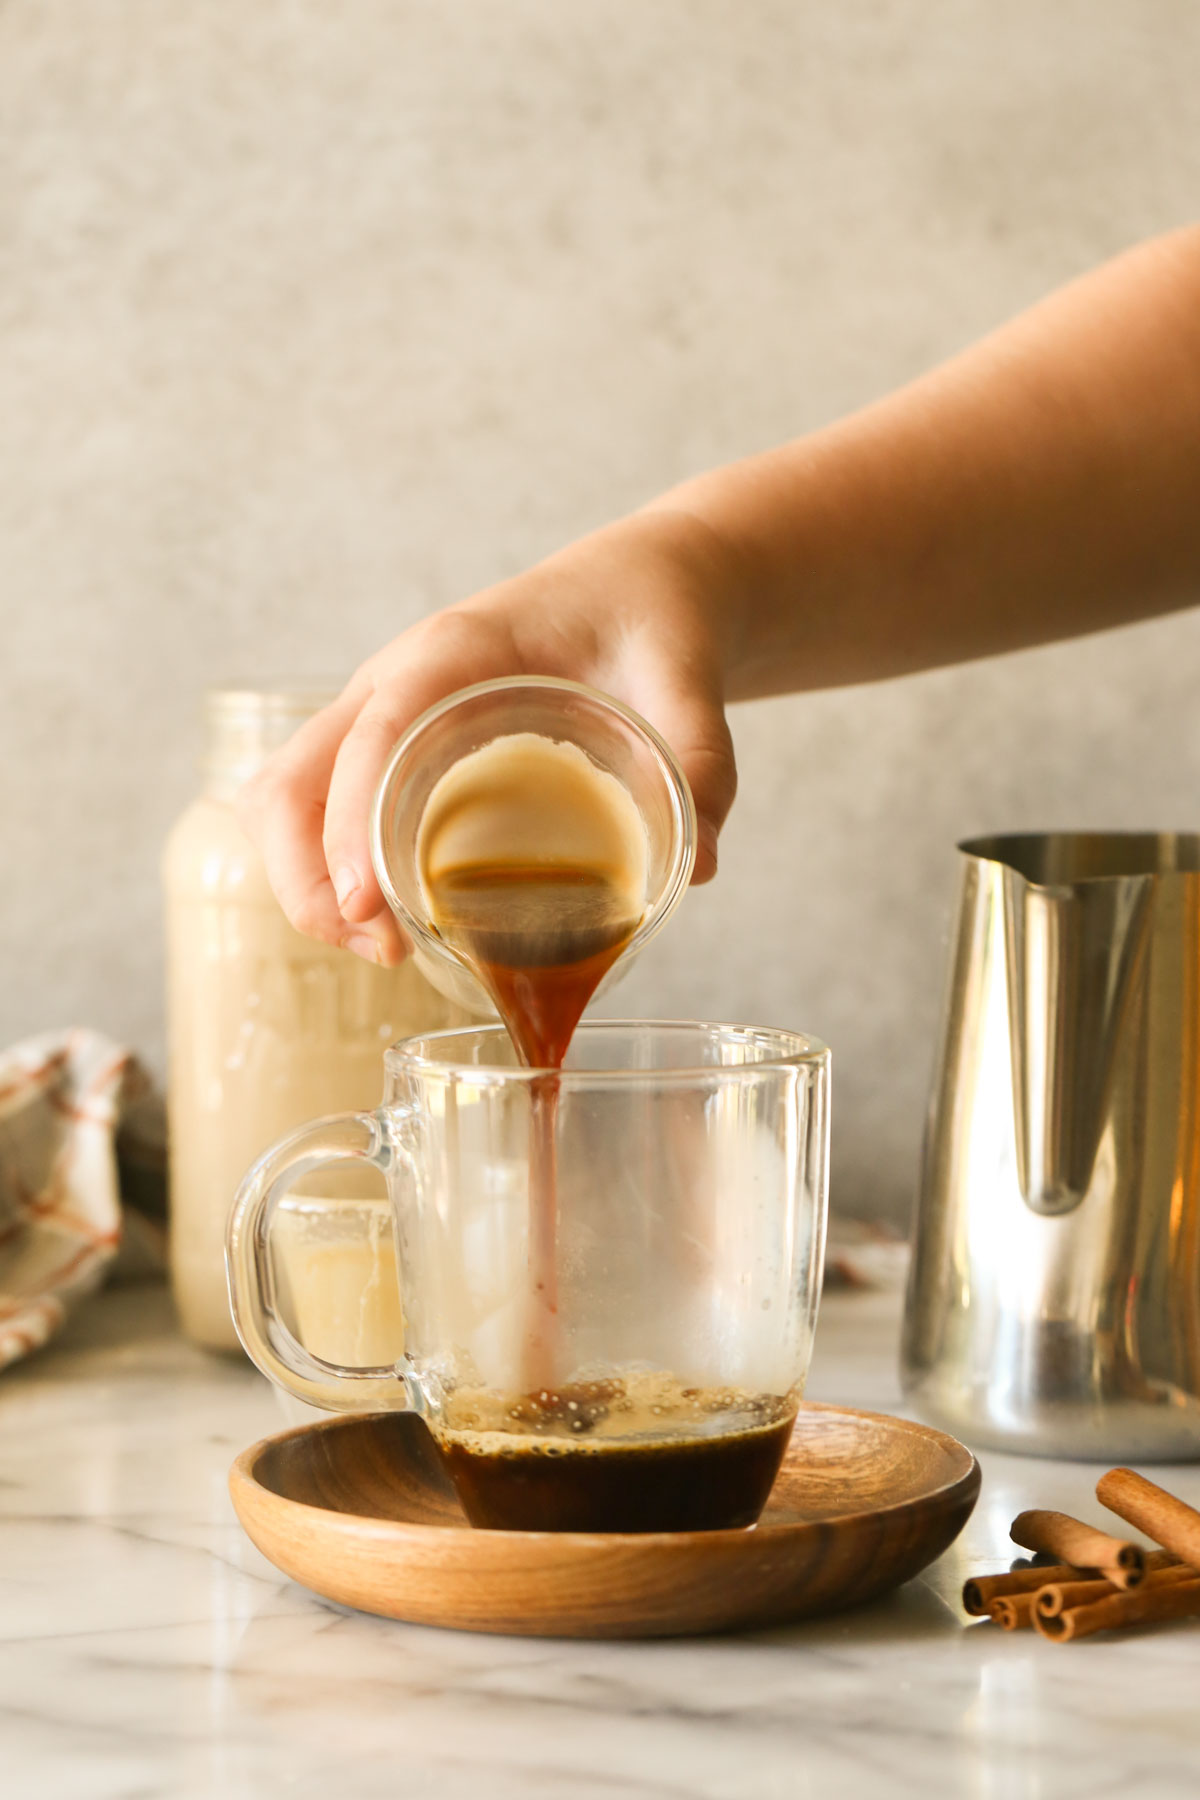 A hand pouring an espresso shot into a glass mug on a wood saucer with cinnamon sticks next to it, with a glass jar of Brown Sugar and Cinnamon Coffee Creamer and a stainless steel pitcher of steamed milk in the background.  